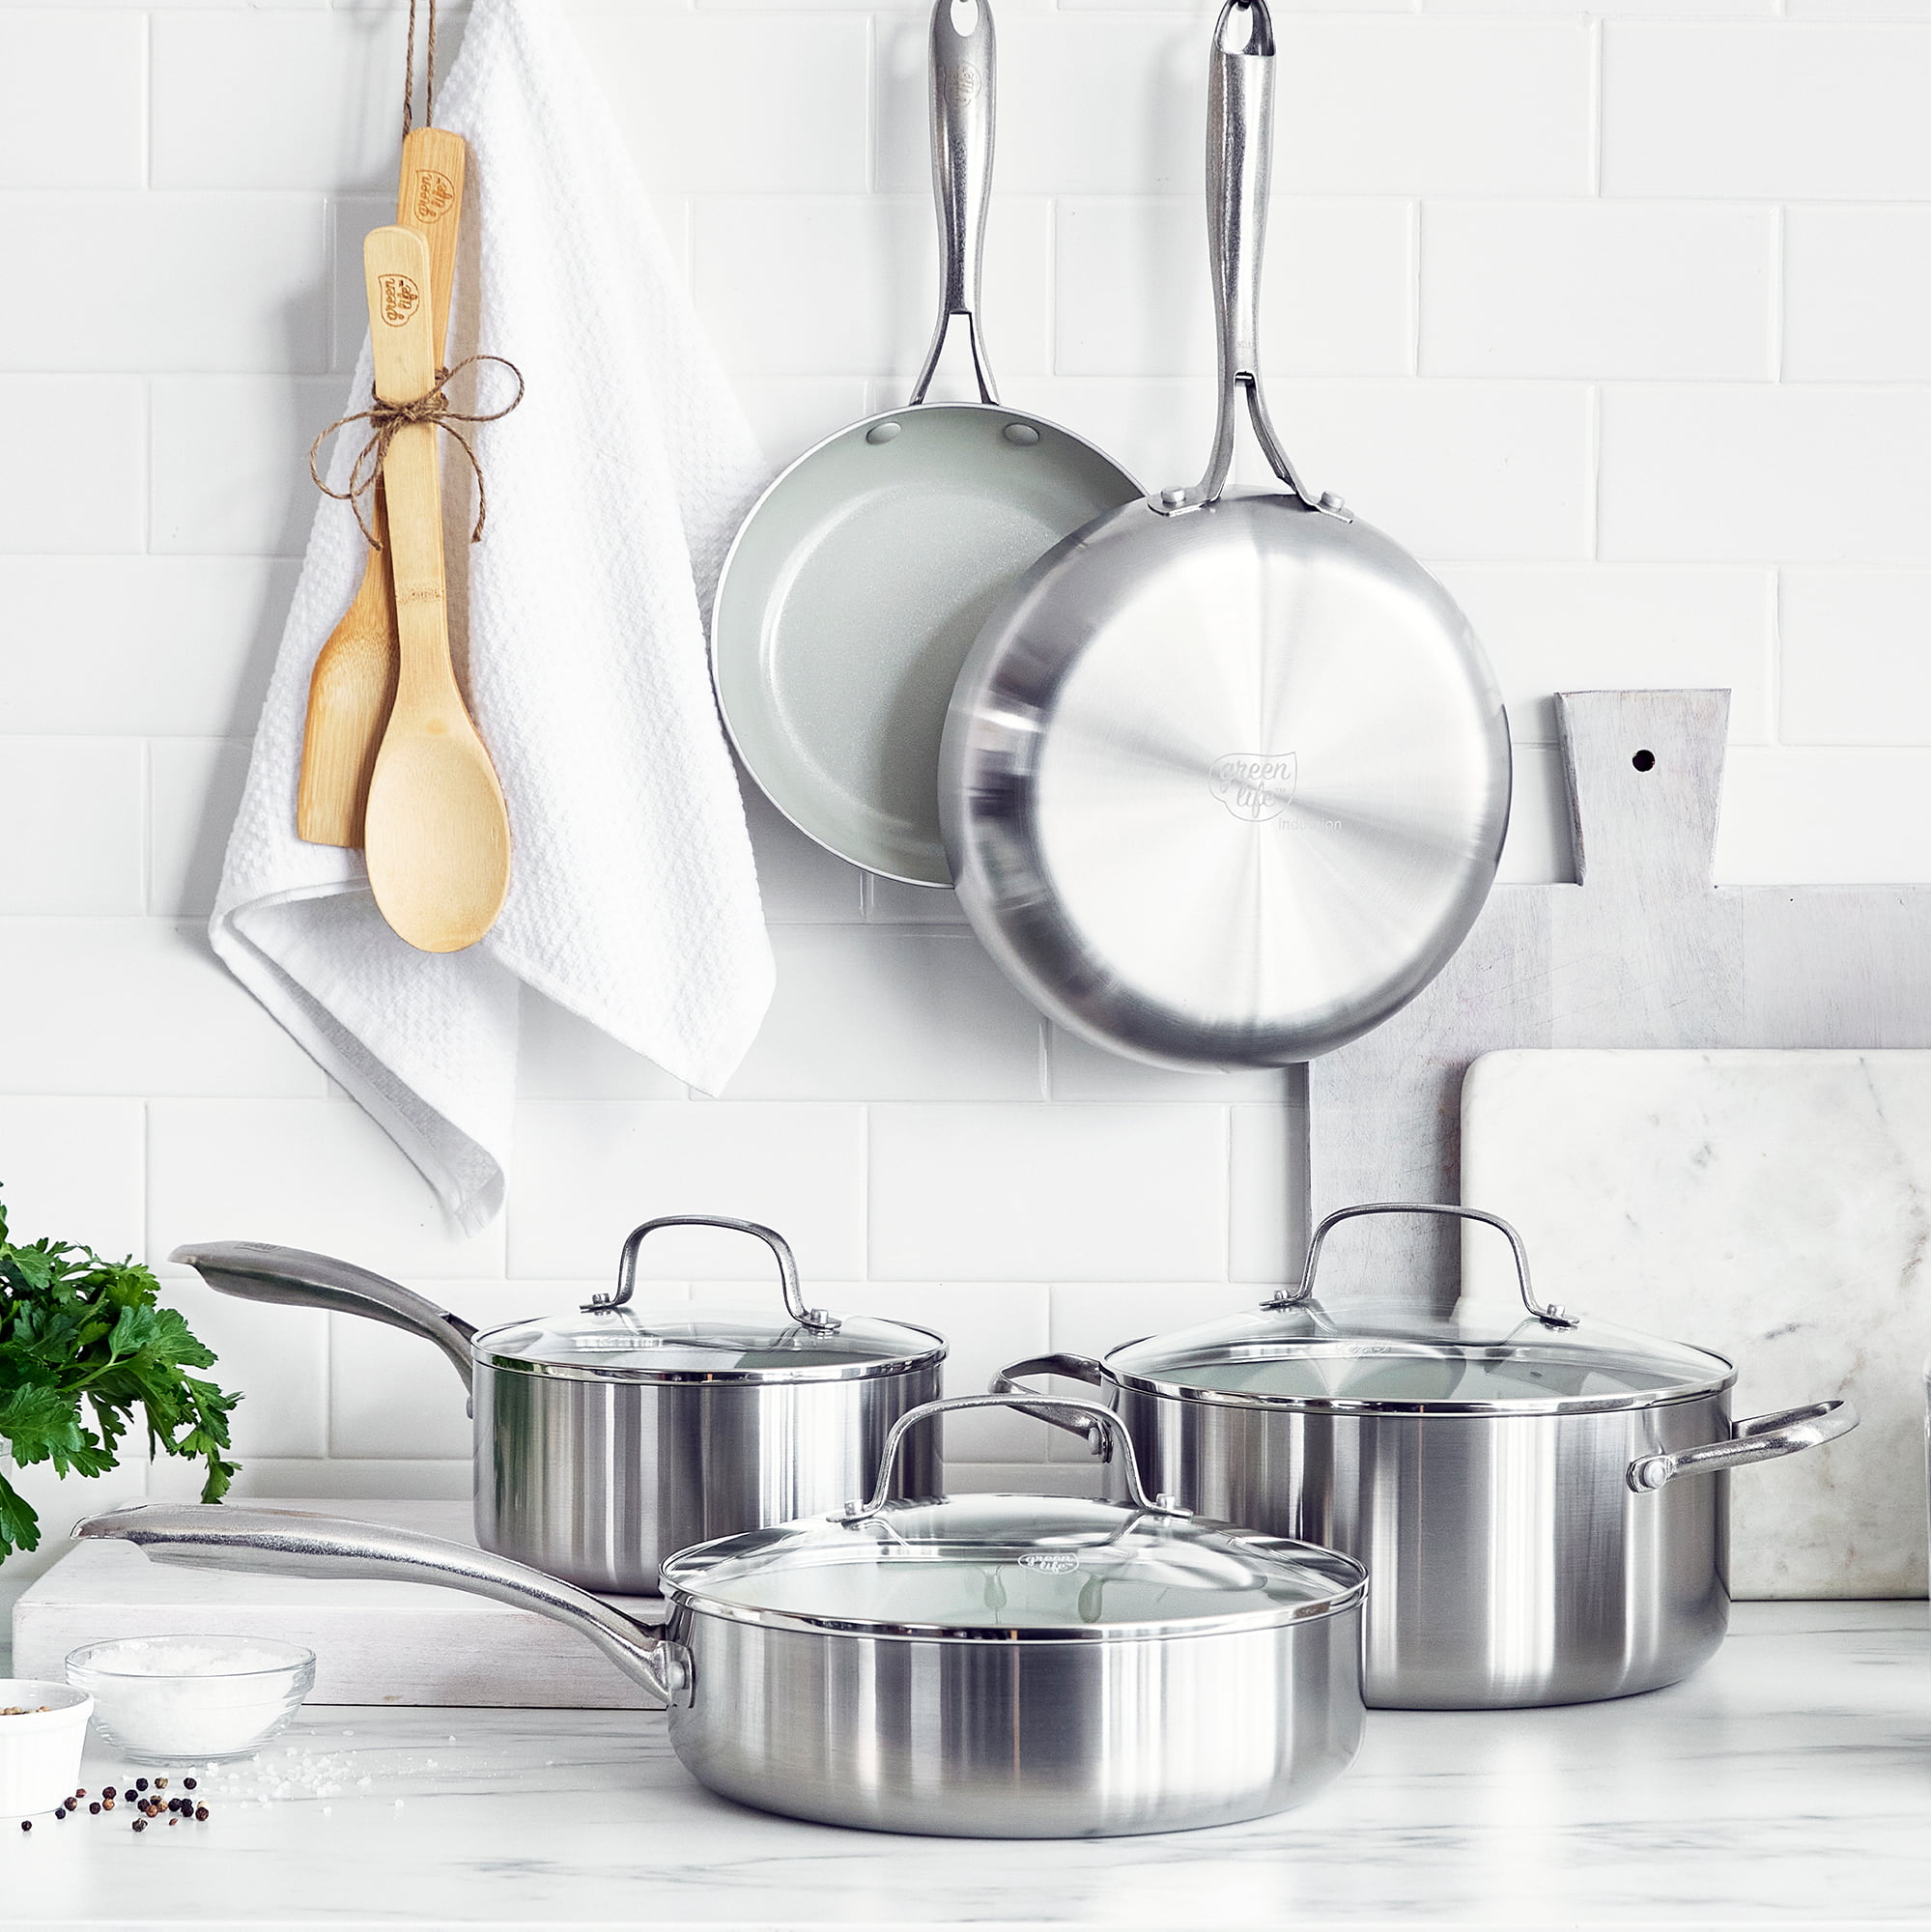 GREENLIFE COOKWARE - Sam's Club